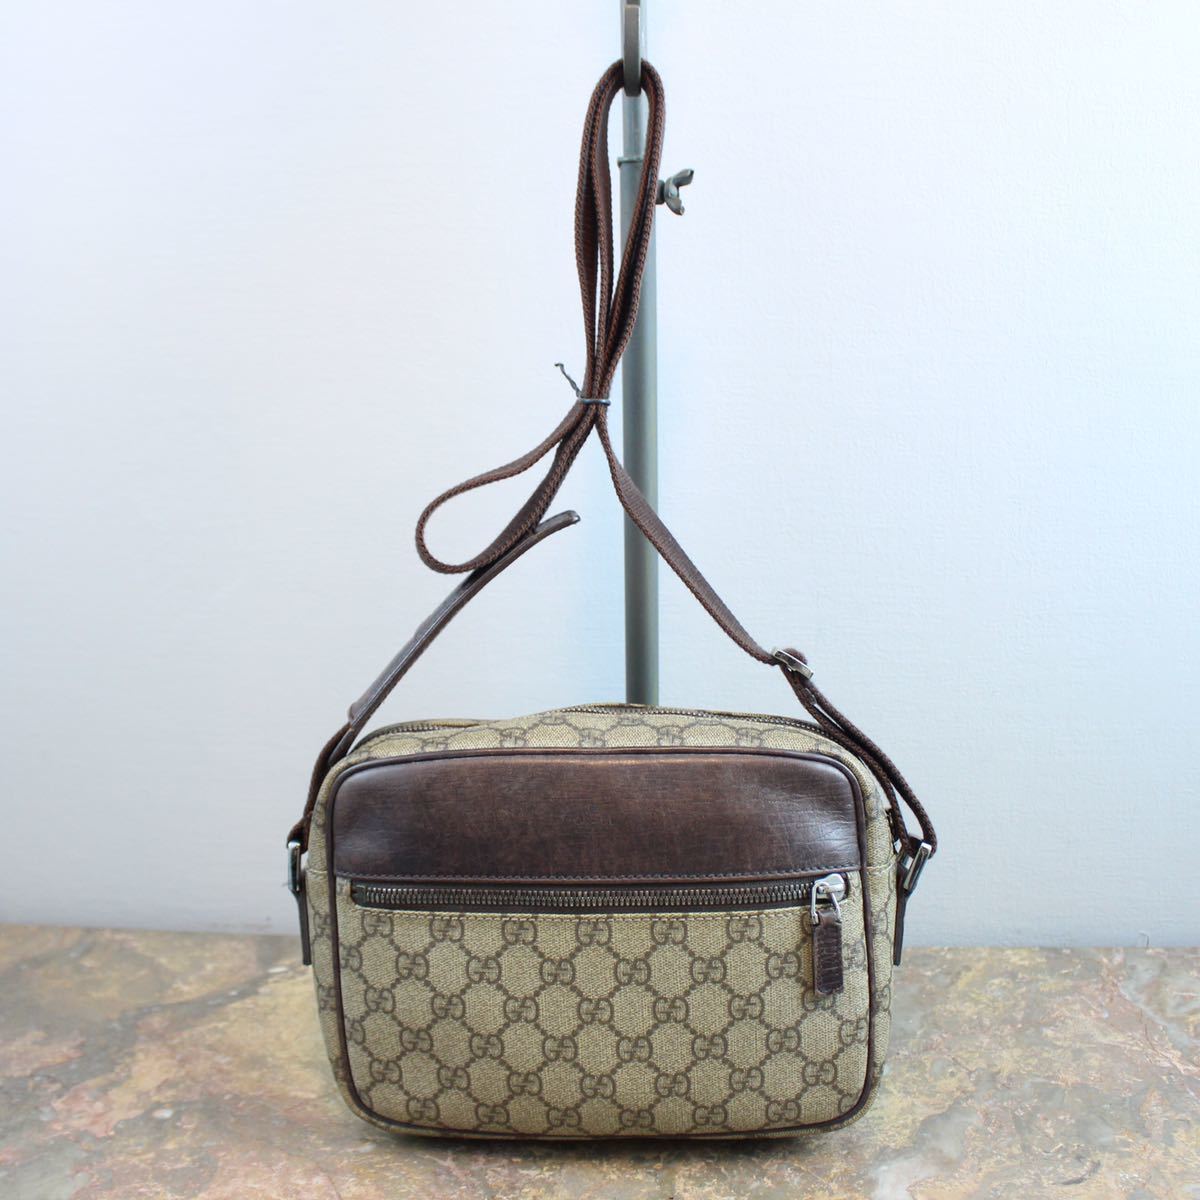 GUCCI GG PATTERNED SHOULDER BAG MADE IN ITALY/グッチGG柄ショルダー